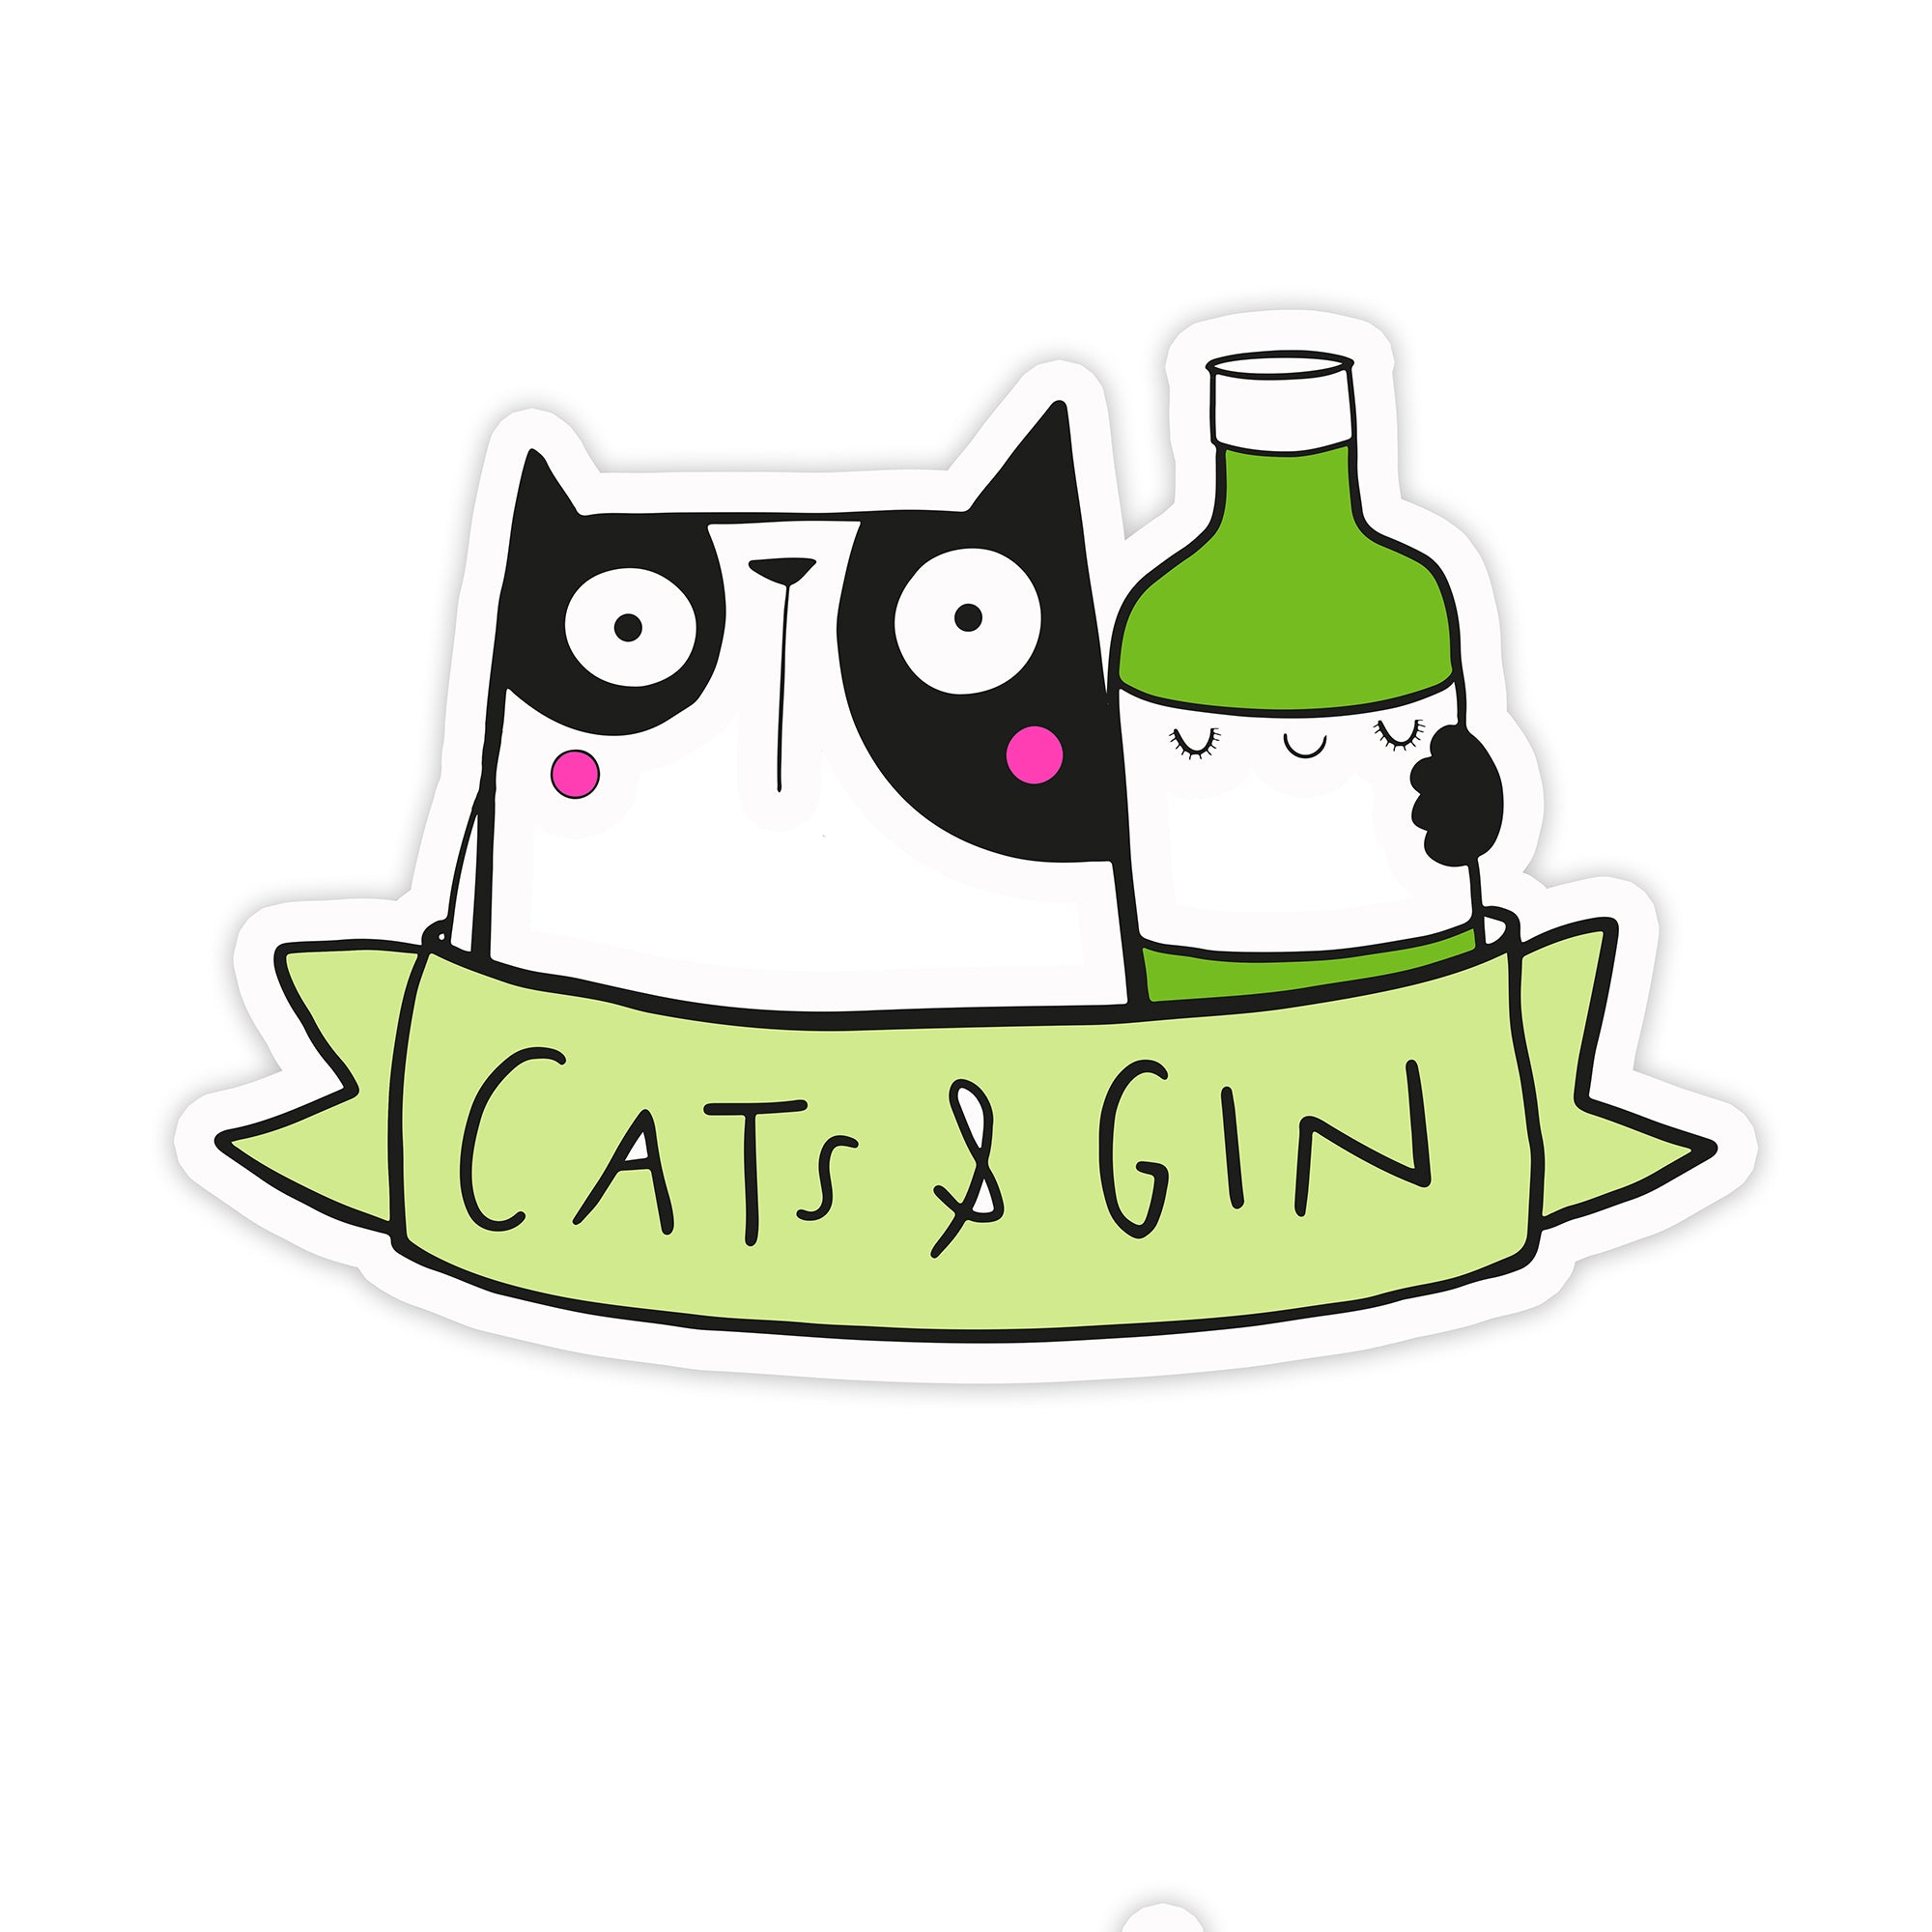 Cats and gin sticker